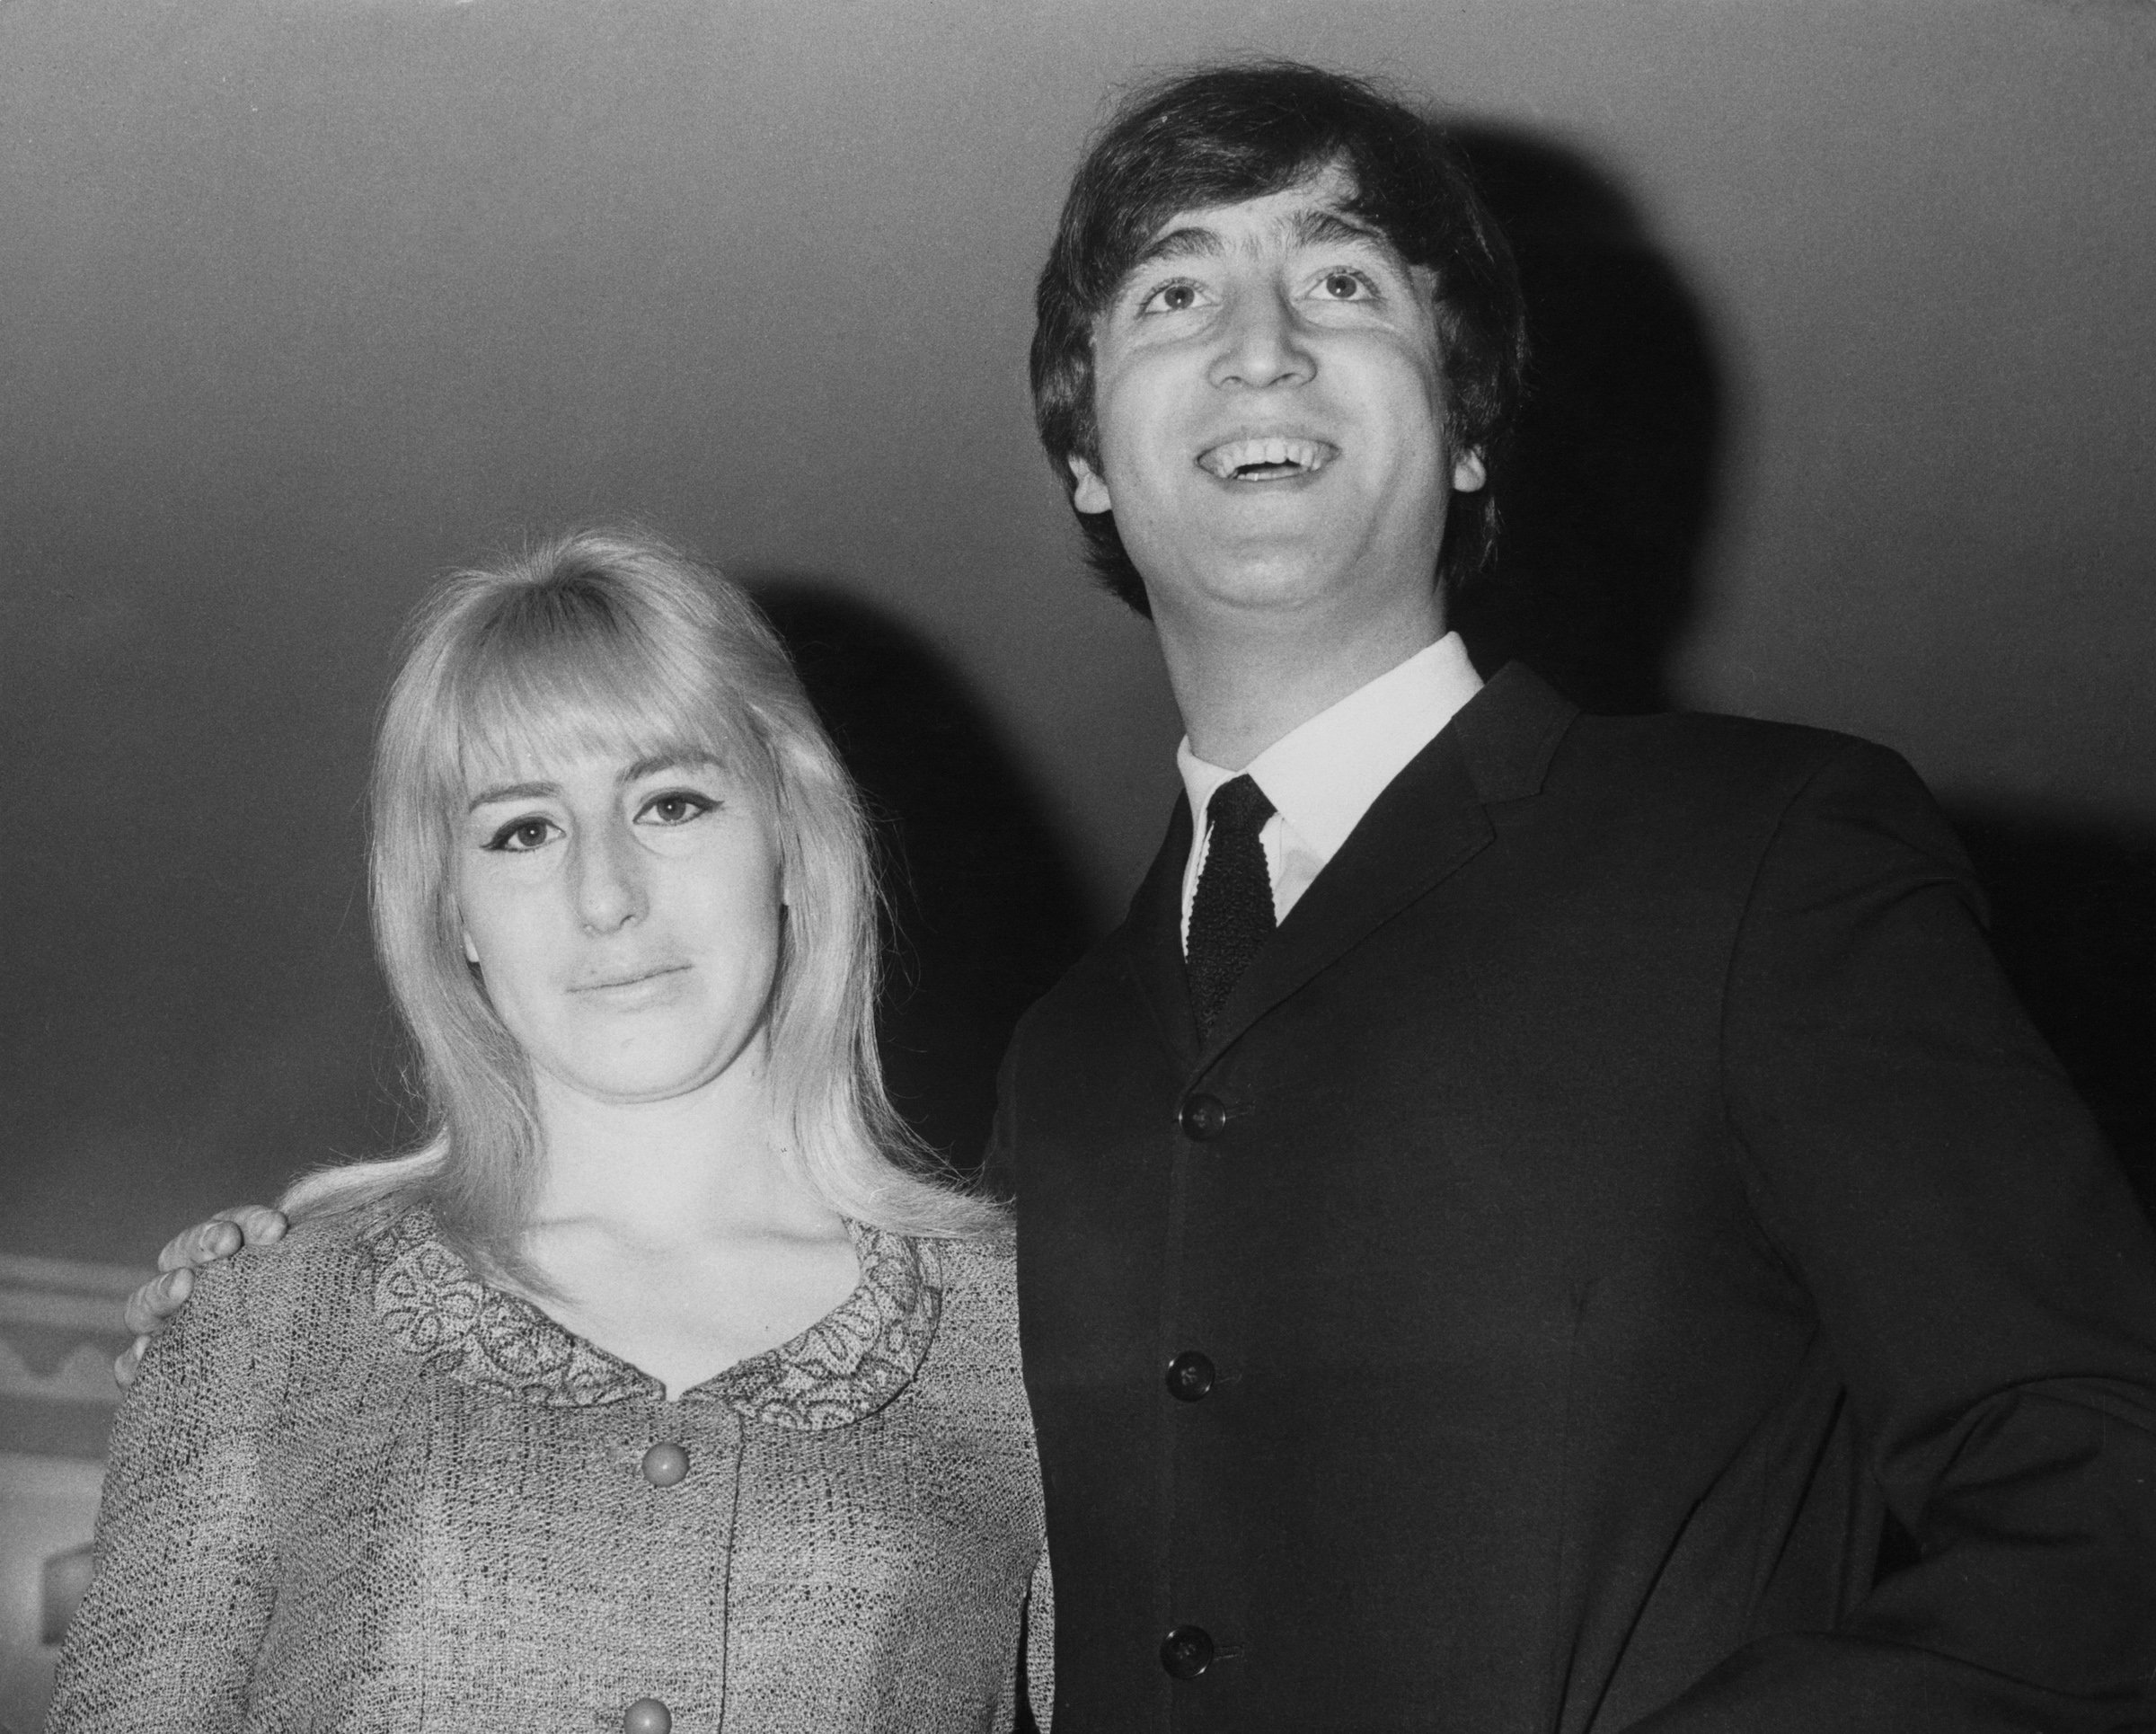 John Lennon Said He Was 'Not Going to Leave' His Then-Girlfriend ...